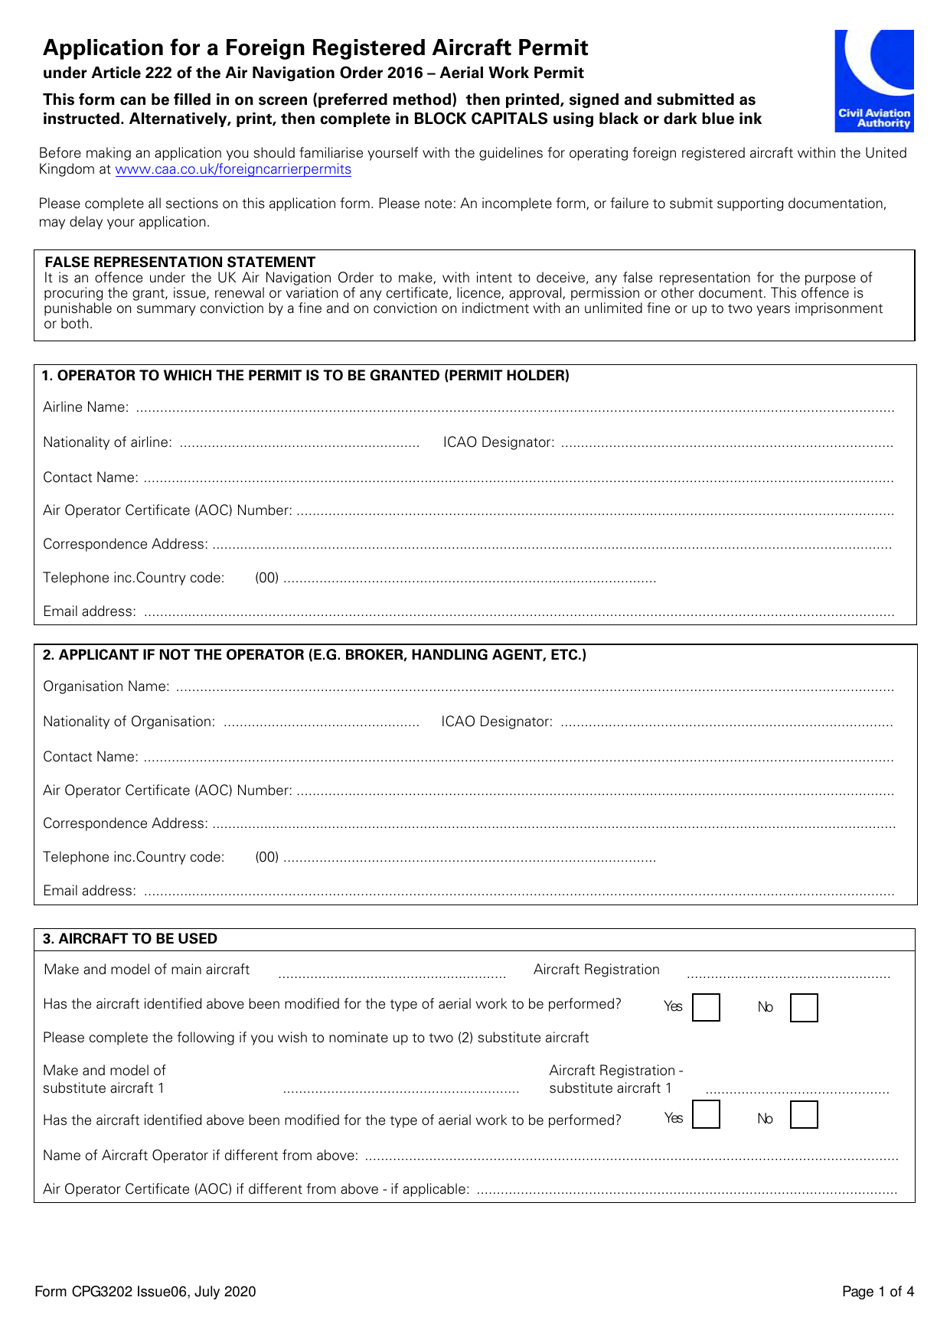 Form CPG3202 Application for a Foreign Registered Aircraft Permit Under Article 222 of the Air Navigation Order 2016 - Aerial Work Permit - United Kingdom, Page 1